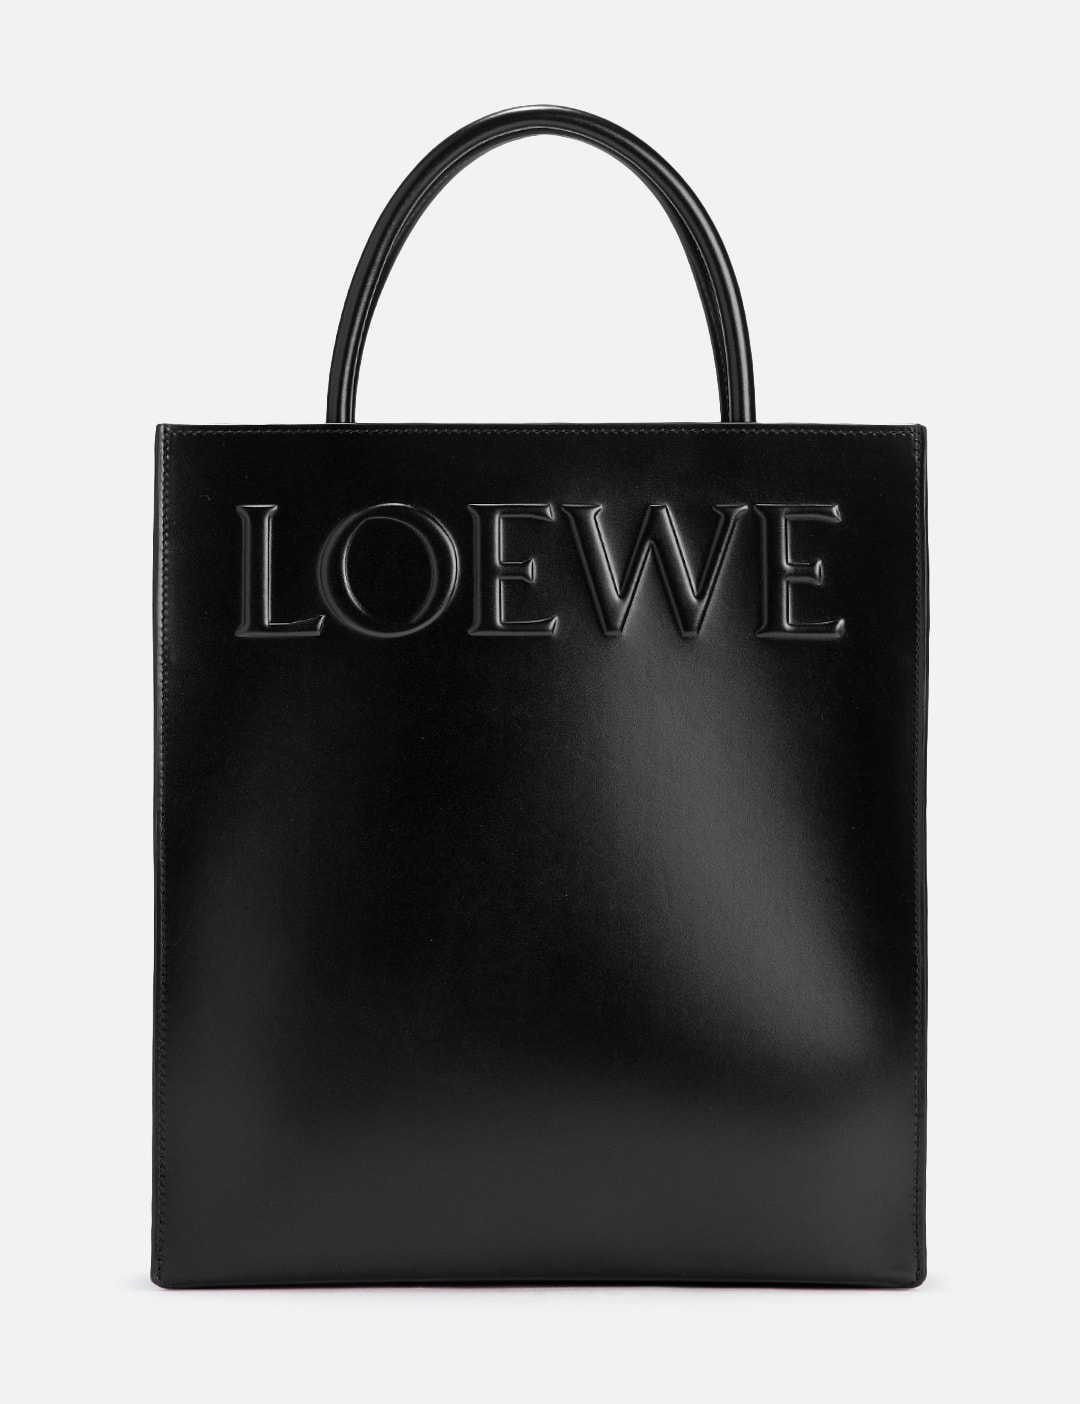 Hereu - Alqueria Straw Tote Bag  HBX - Globally Curated Fashion and  Lifestyle by Hypebeast